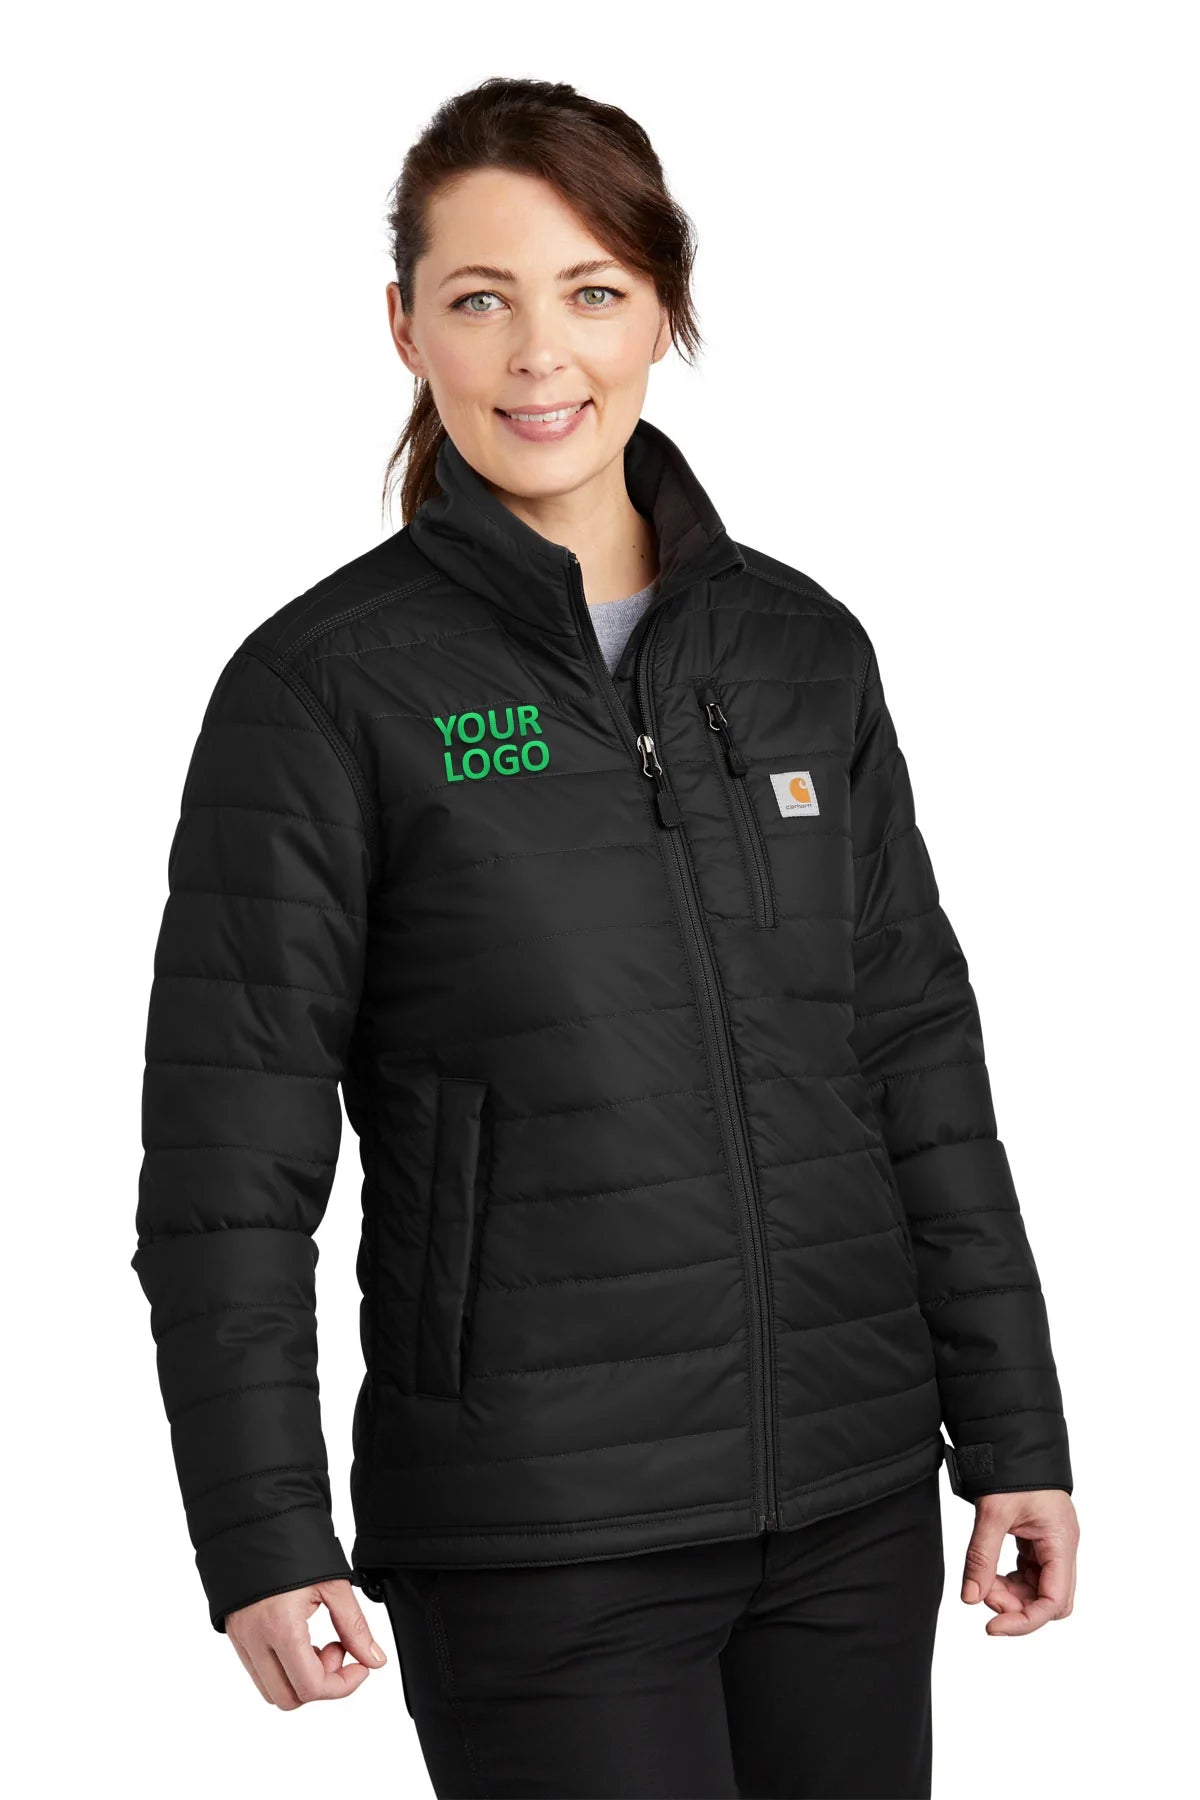 Carhartt Black CT104314 company embroidered jackets